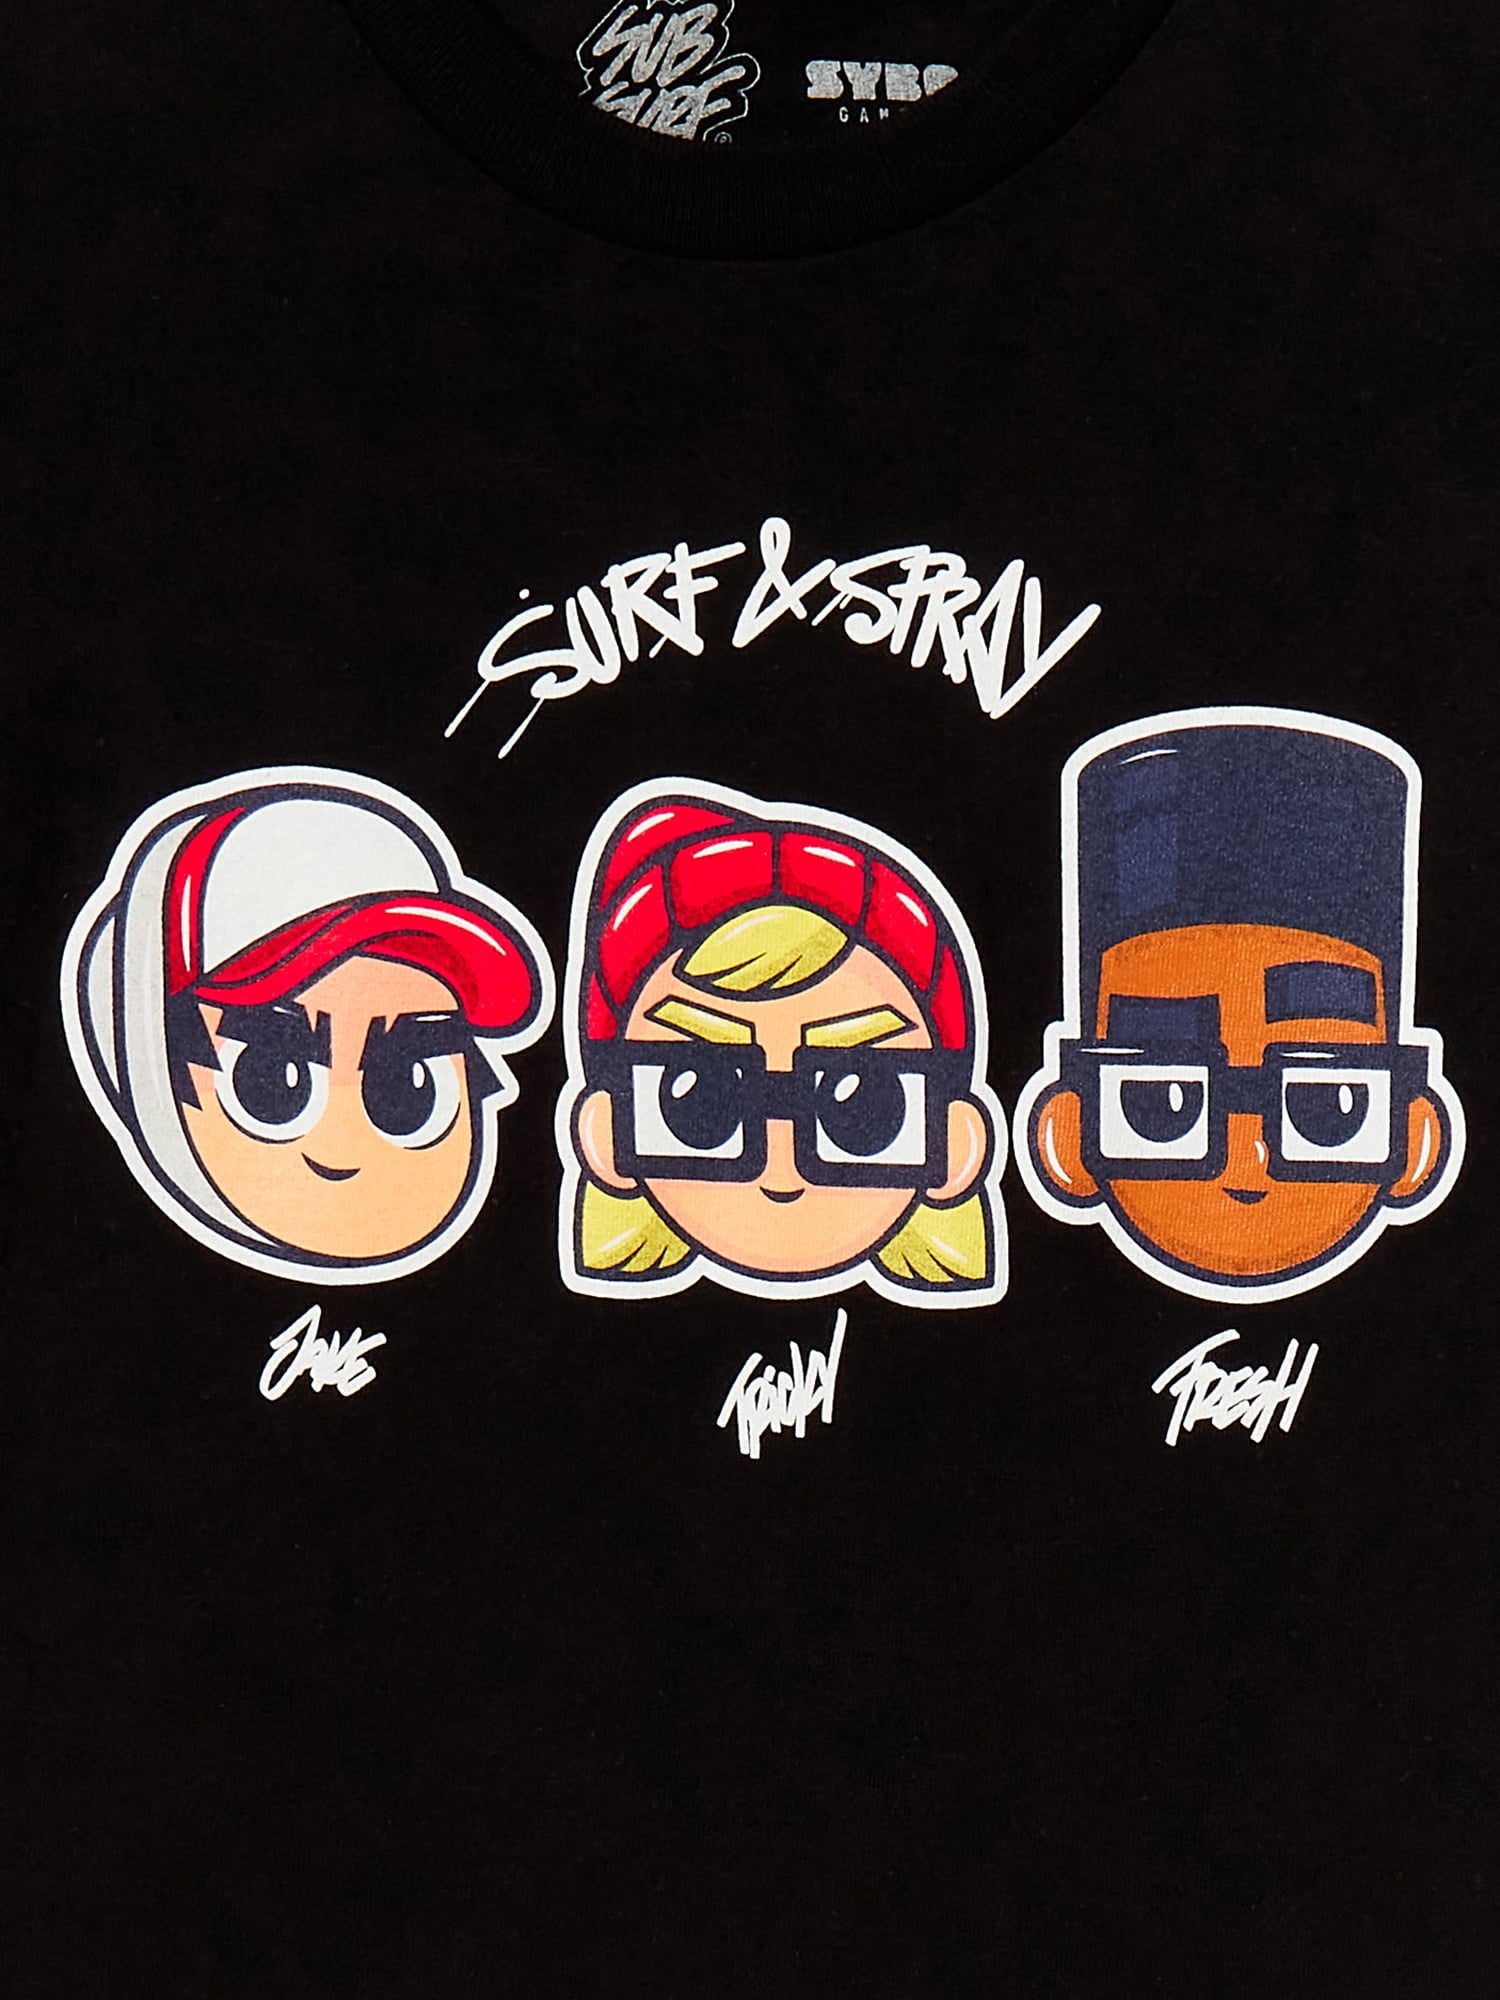 subway surfers Essential T-Shirt for Sale by Barry Kyius